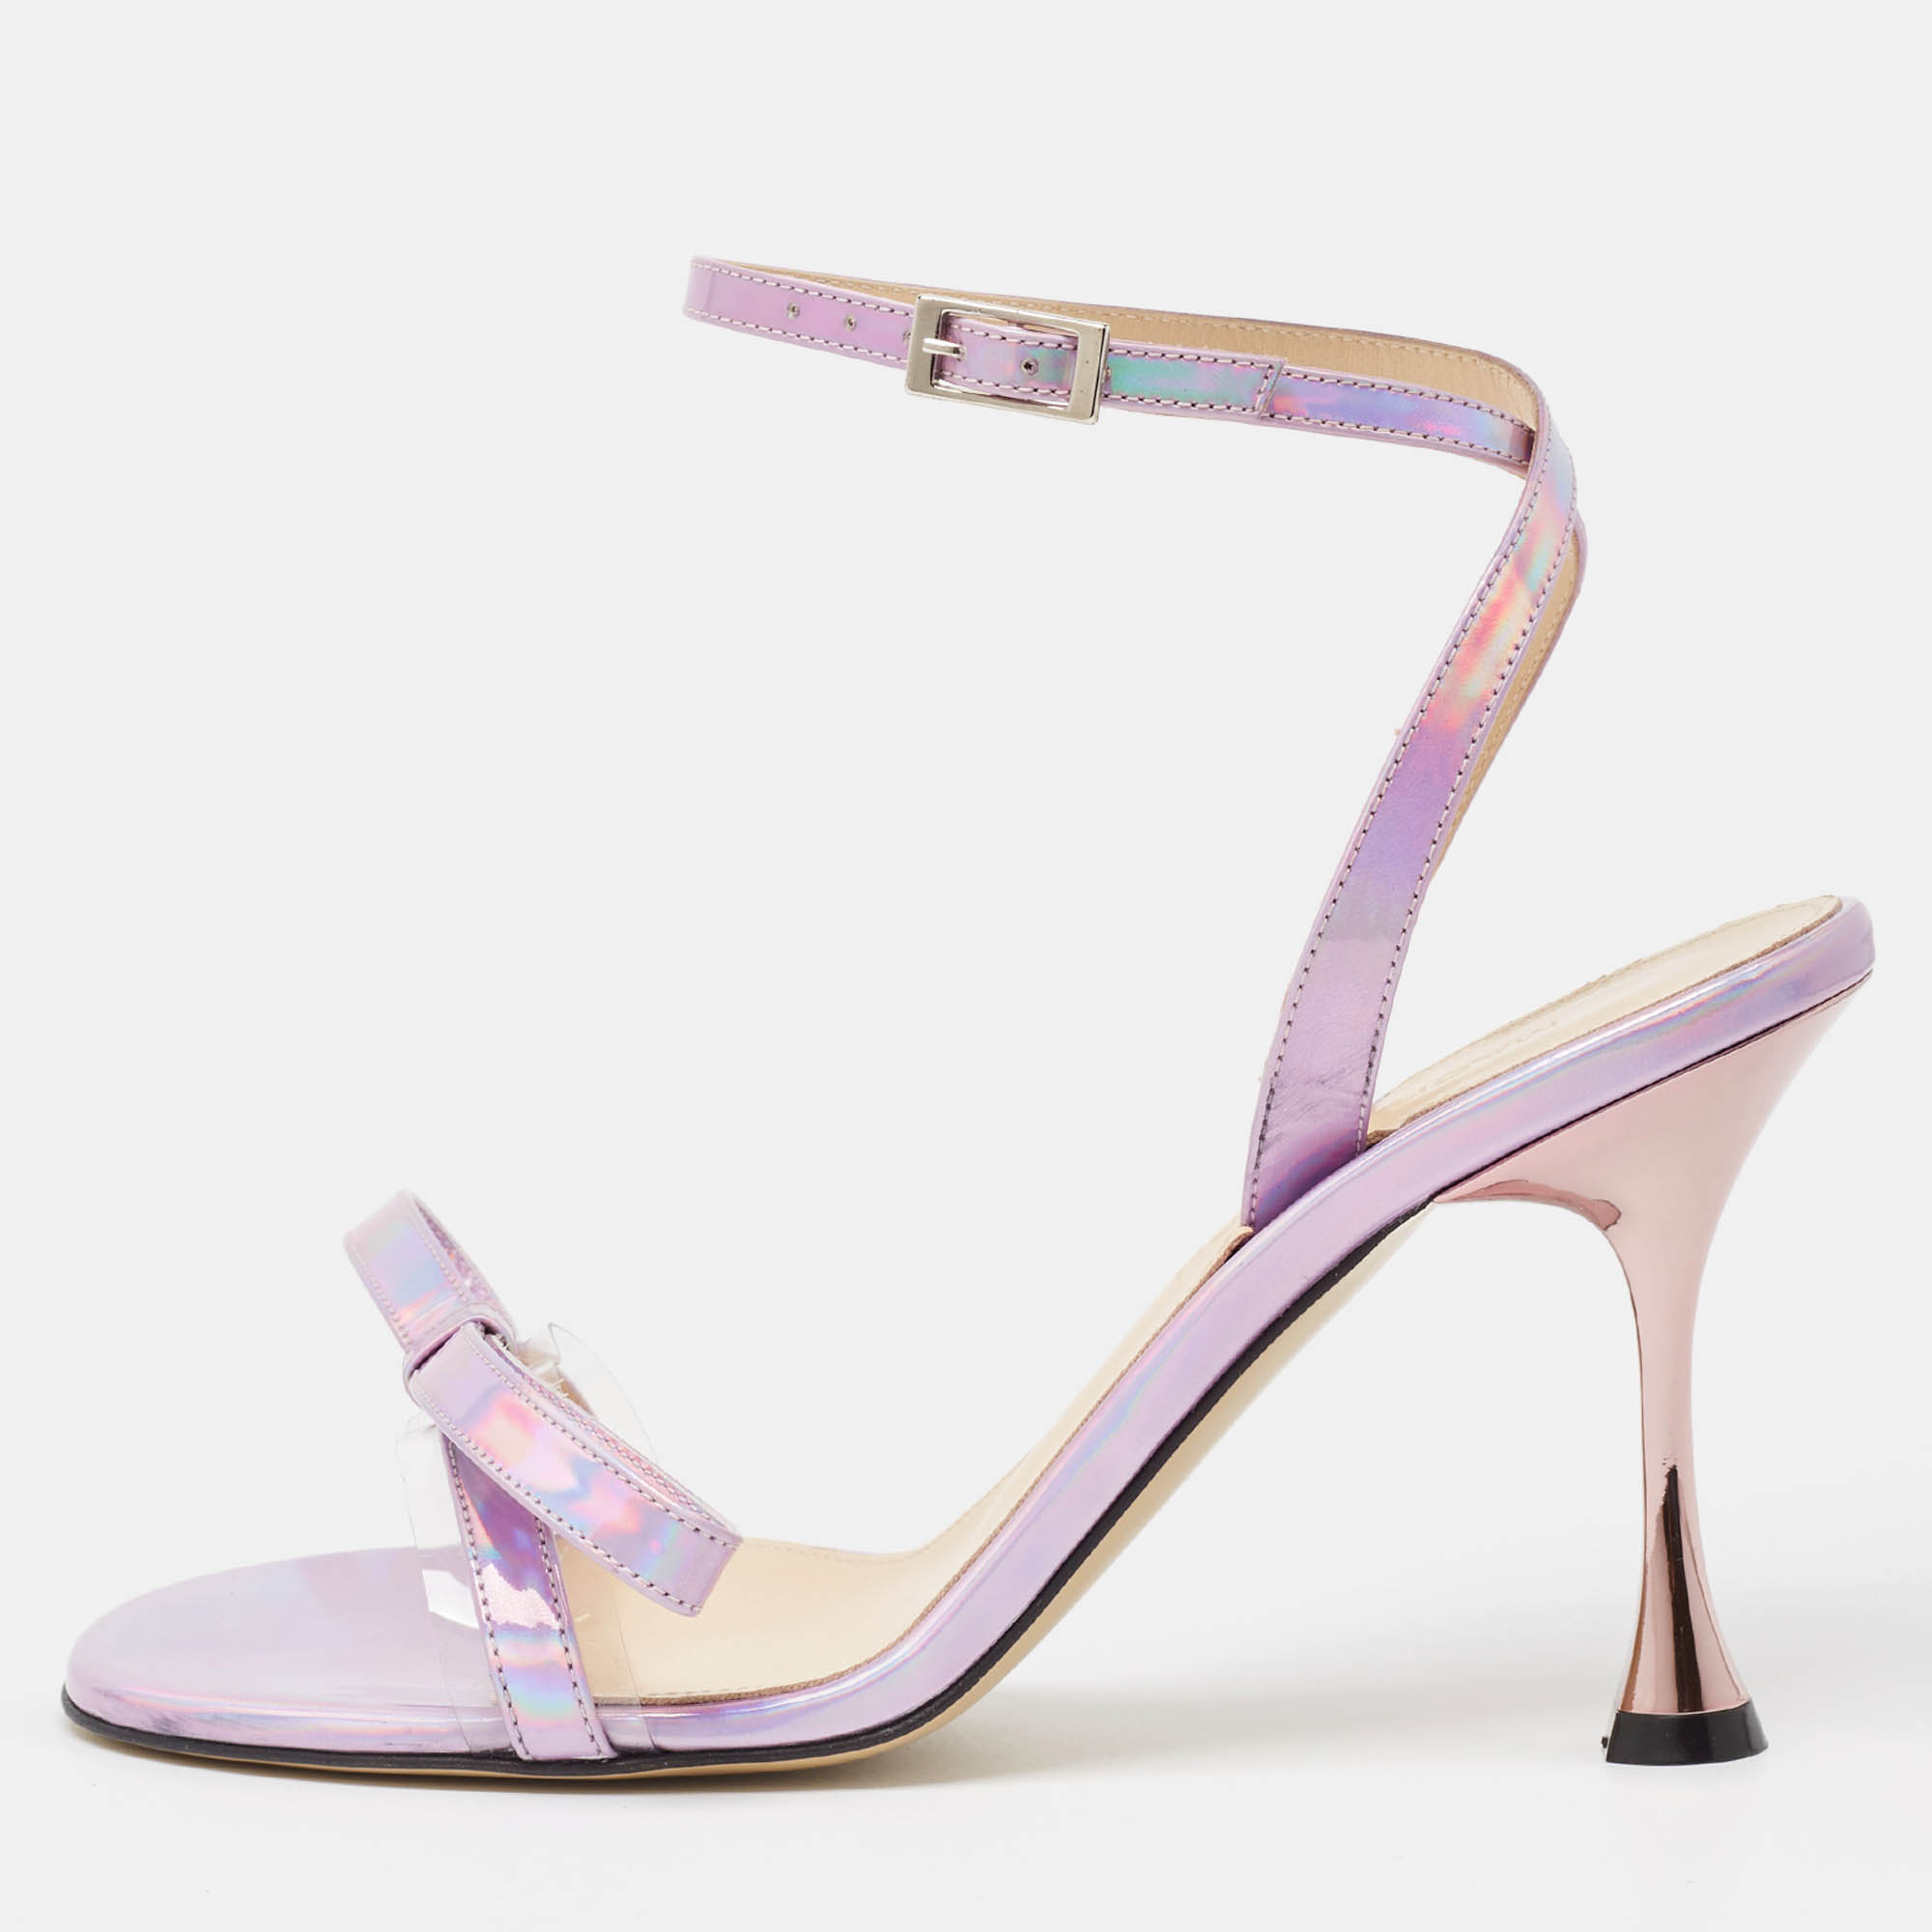 Mach & mach iridescent pvc  french bow ankle strap sandals size 37